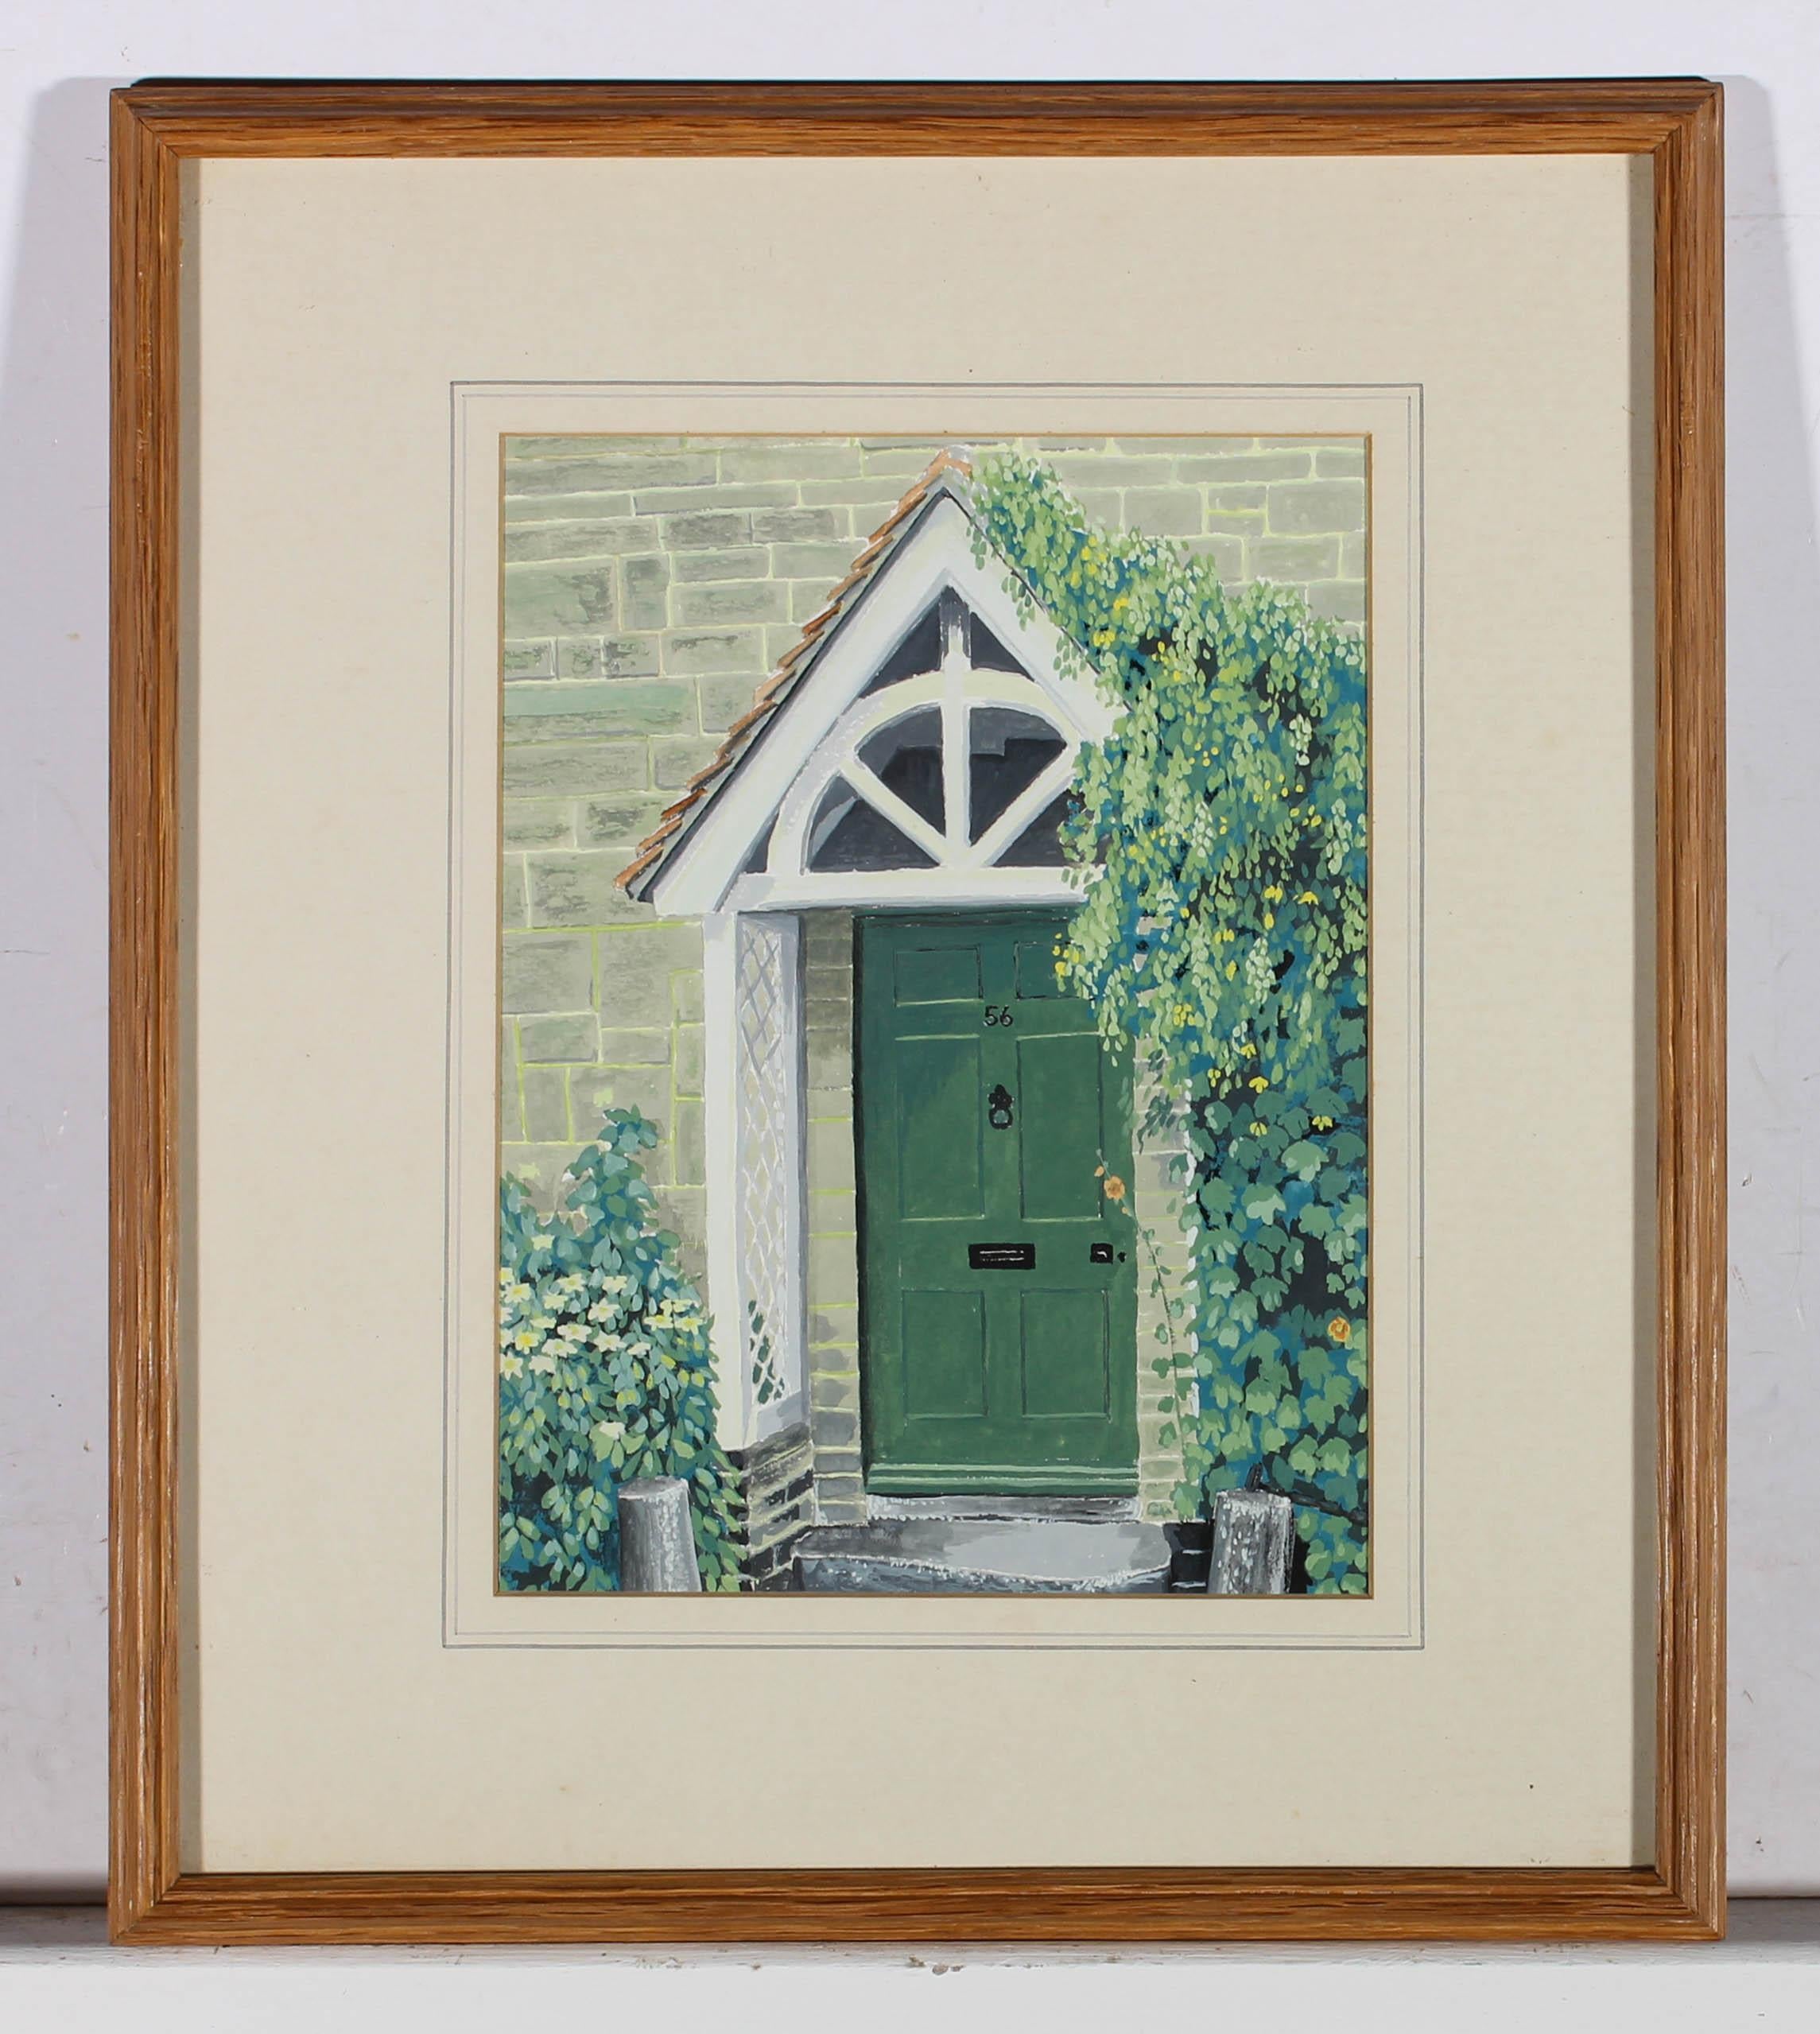 An inviting green door with white portico surrounded by more green shrubbery. Well presented in a wash line mount and simple wooden frame. Unsigned. On wove.